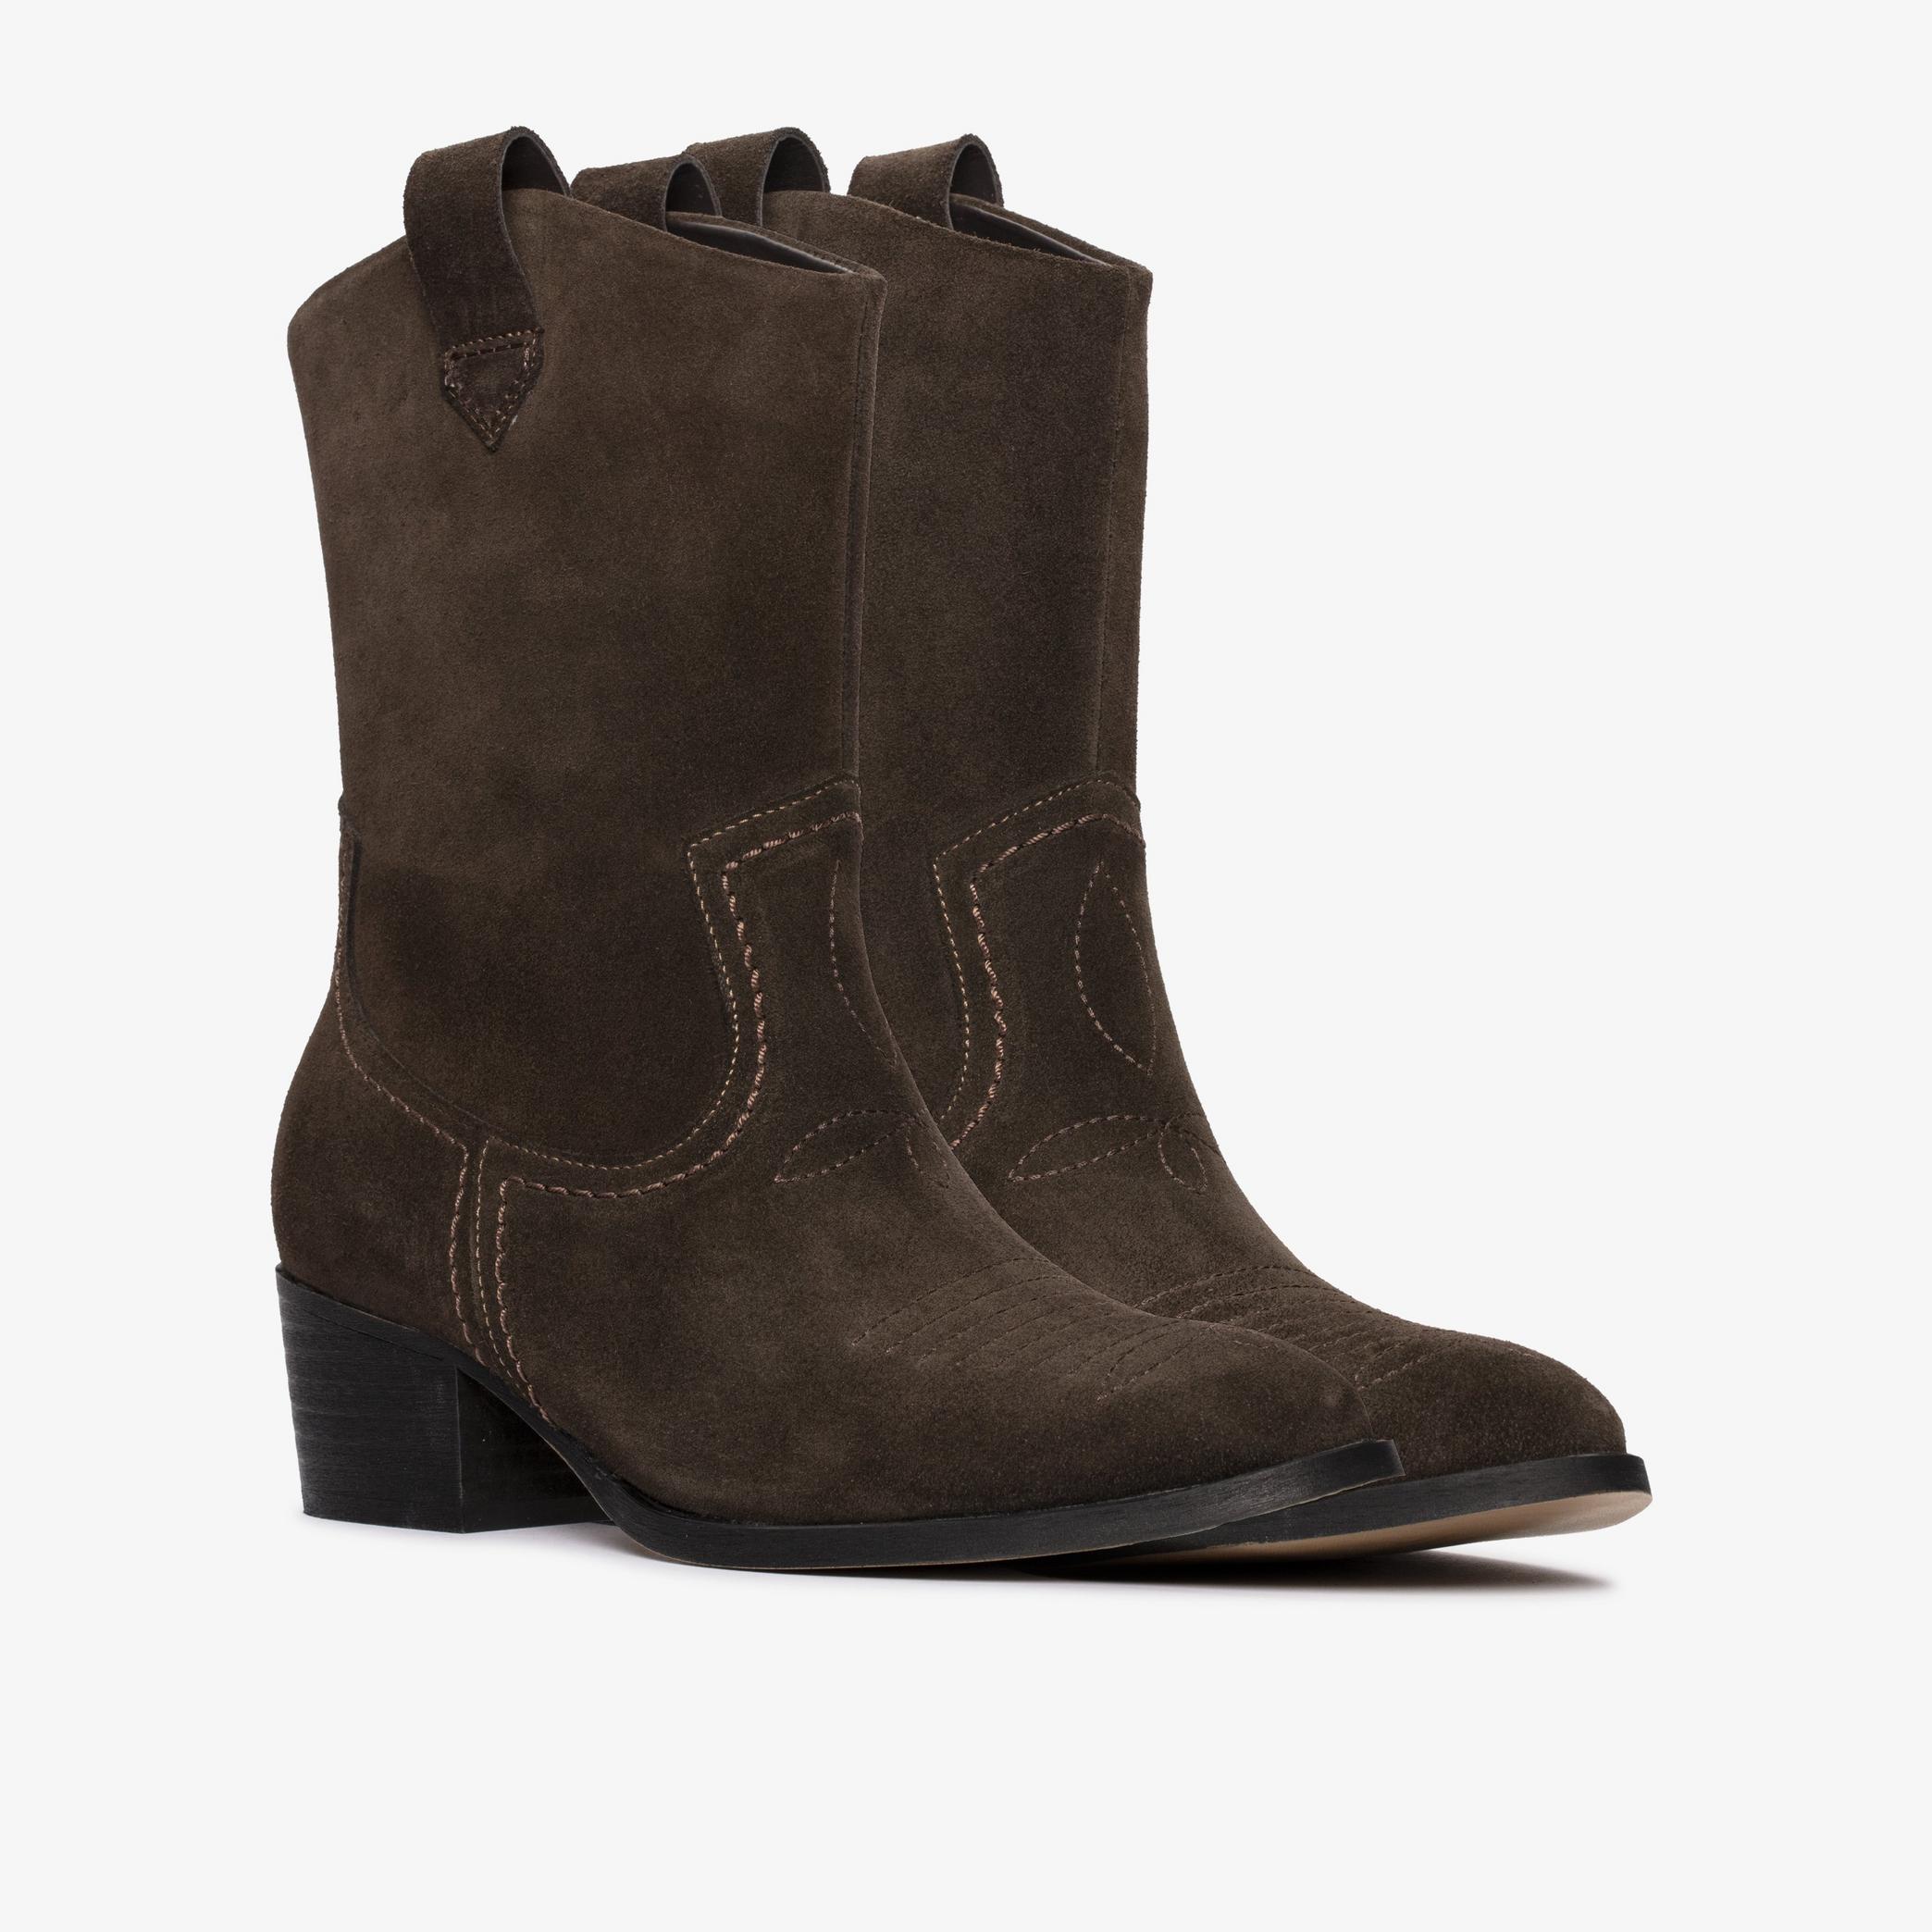 Octavia Up Dark Brown Suede Mid Calf Boots, view 4 of 6